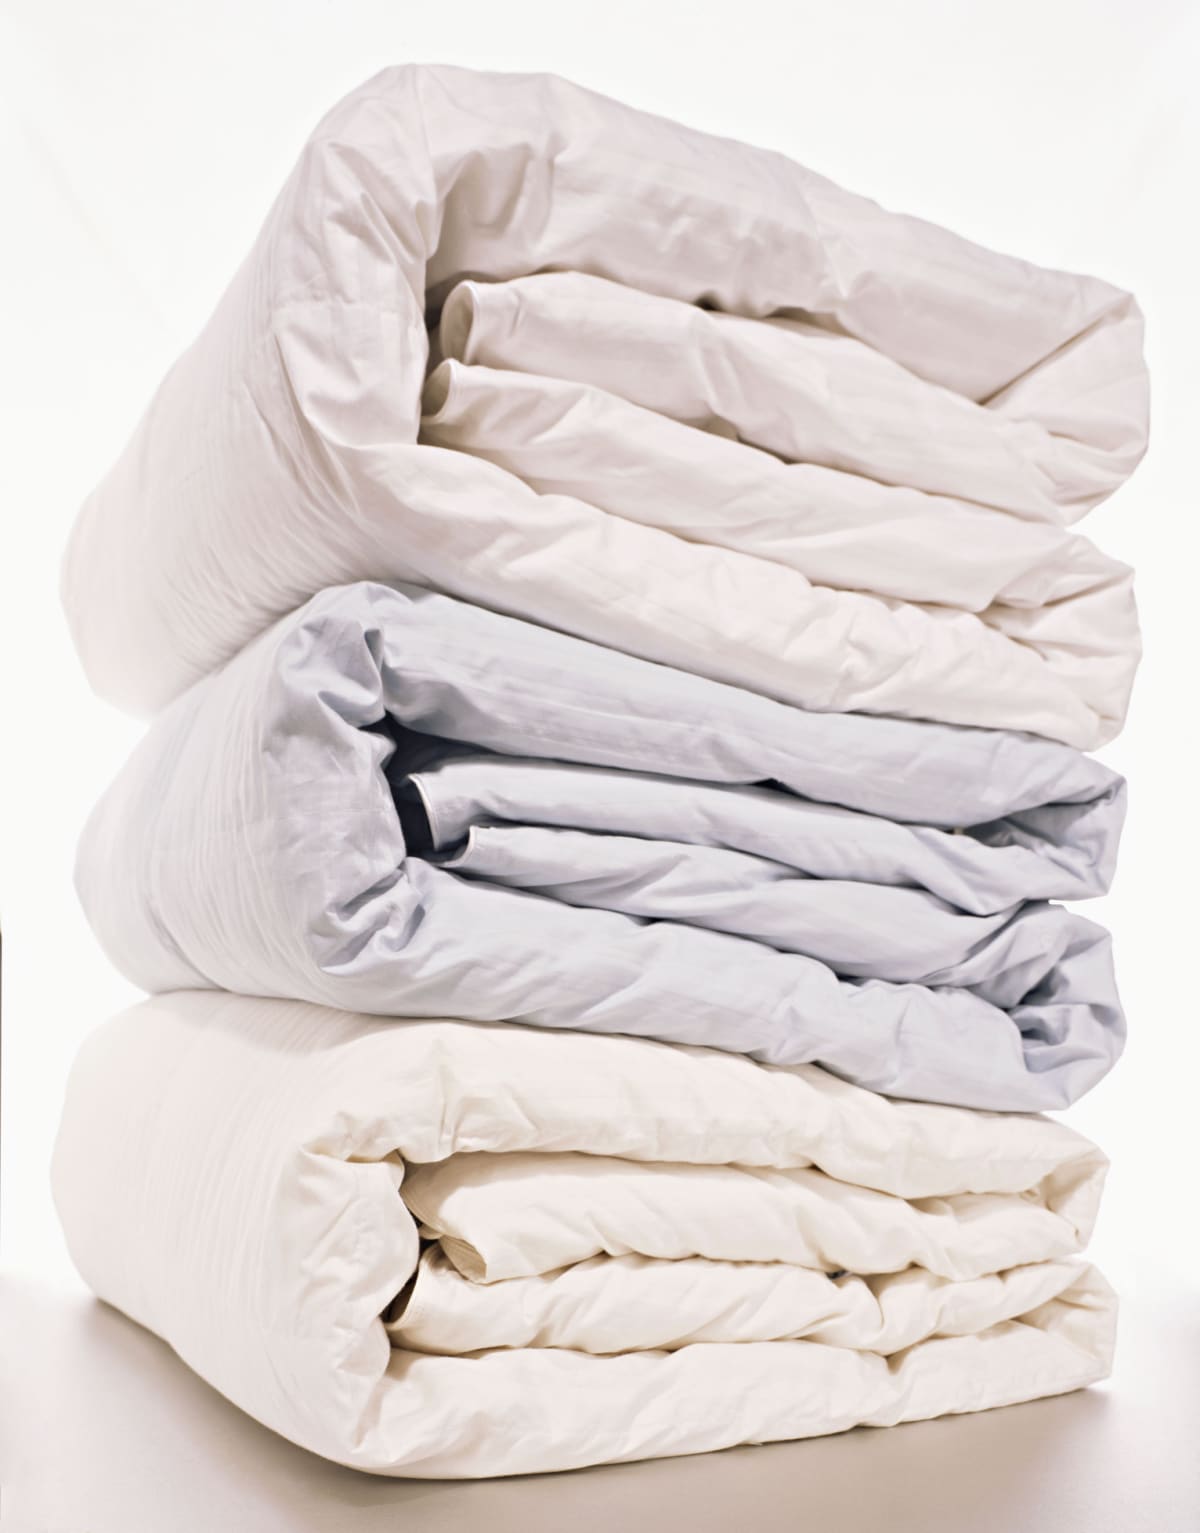 Down comforters stacked on top of each other